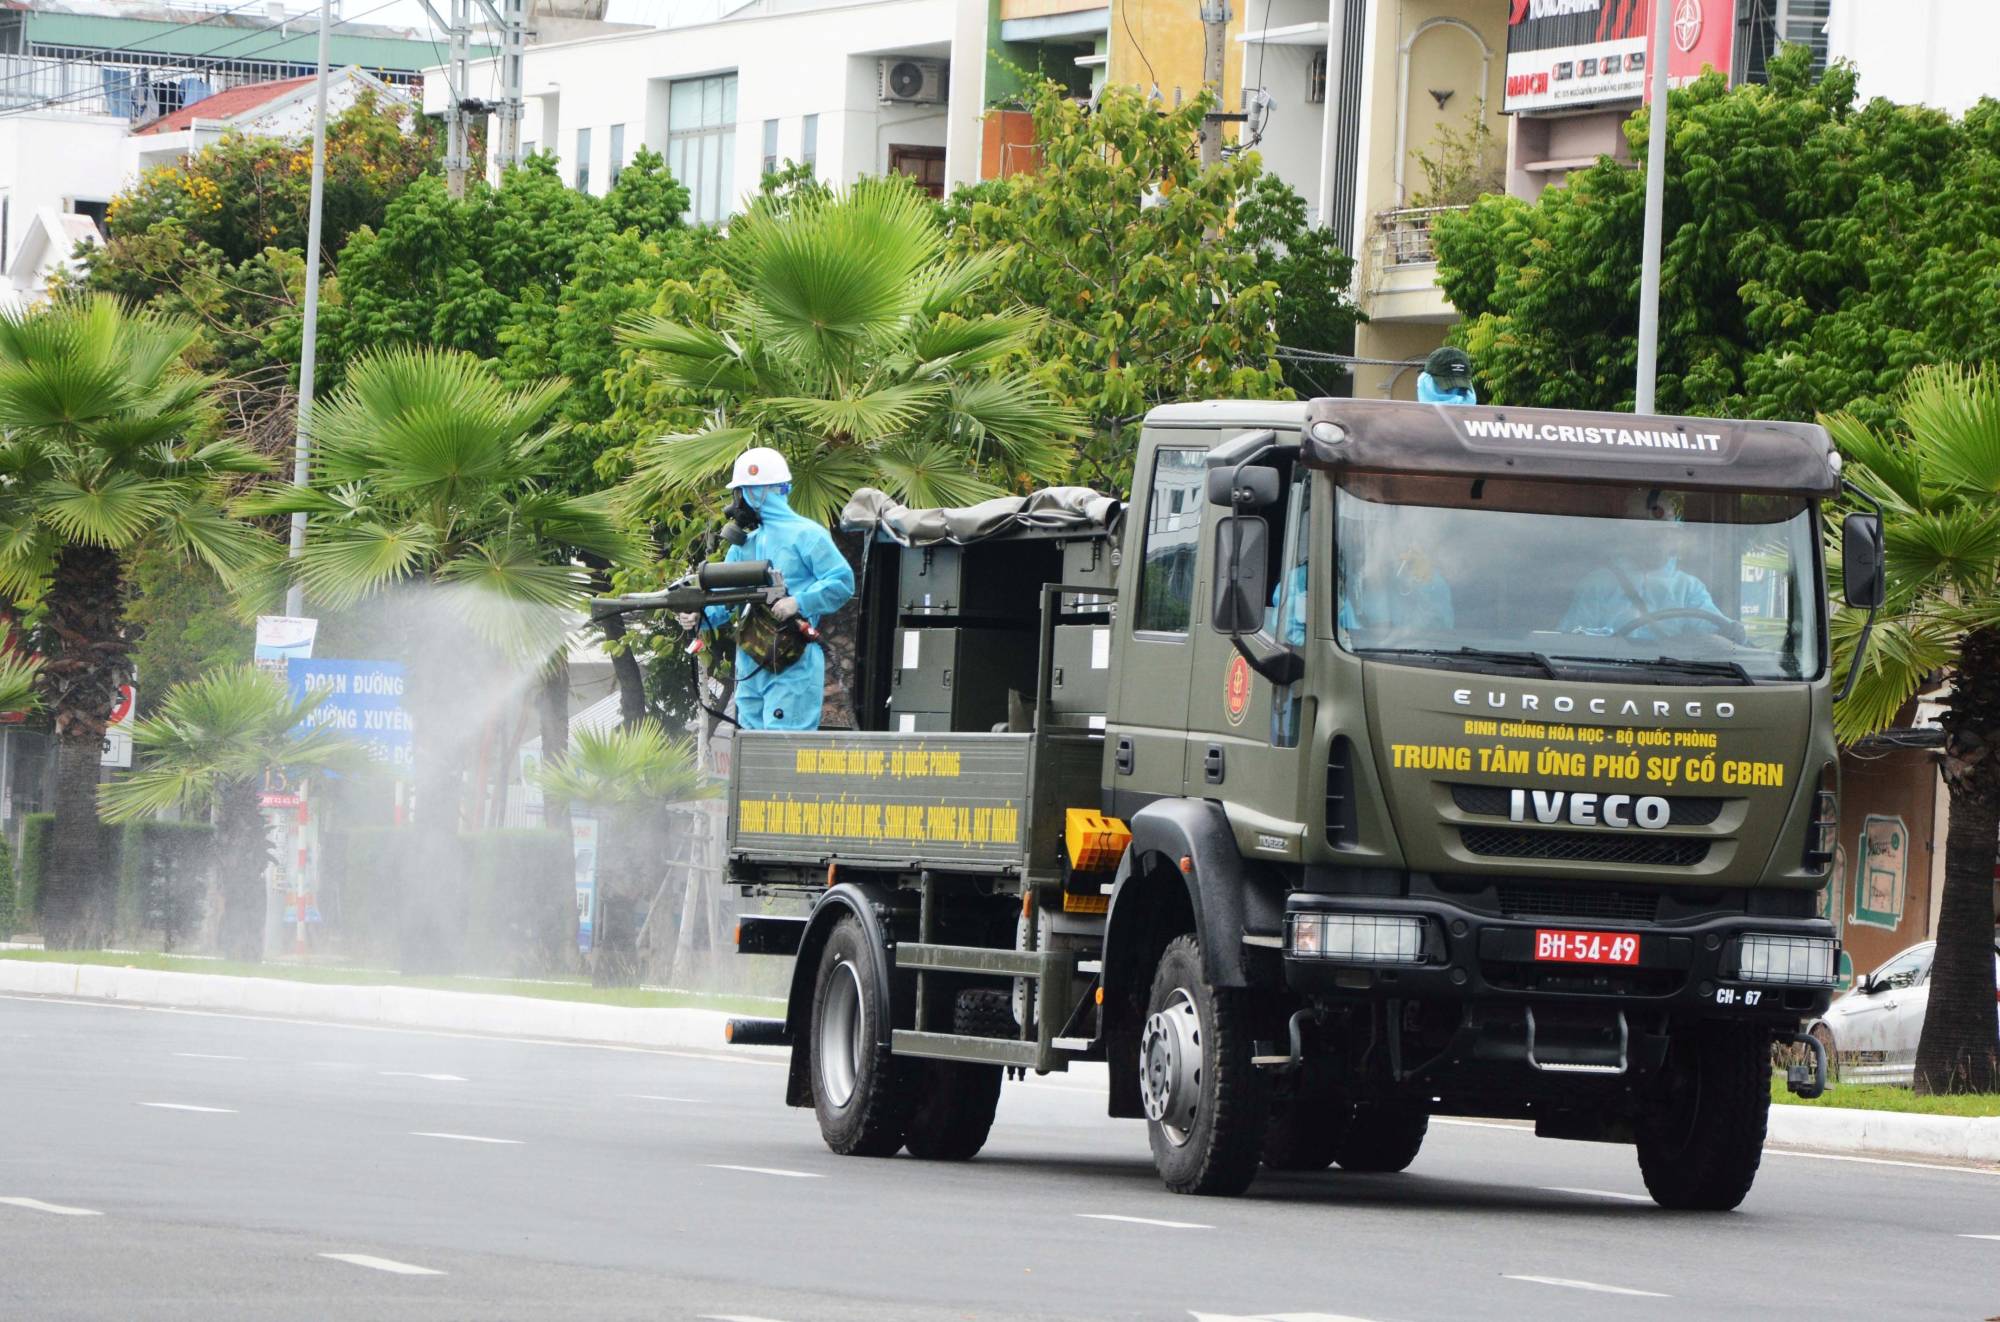 A soldier sprays disinfectants on a road from a military vehicle to help curb a coronavirus outbreak in Da Nang, Vietnam, on Aug. 3. | REUTERS